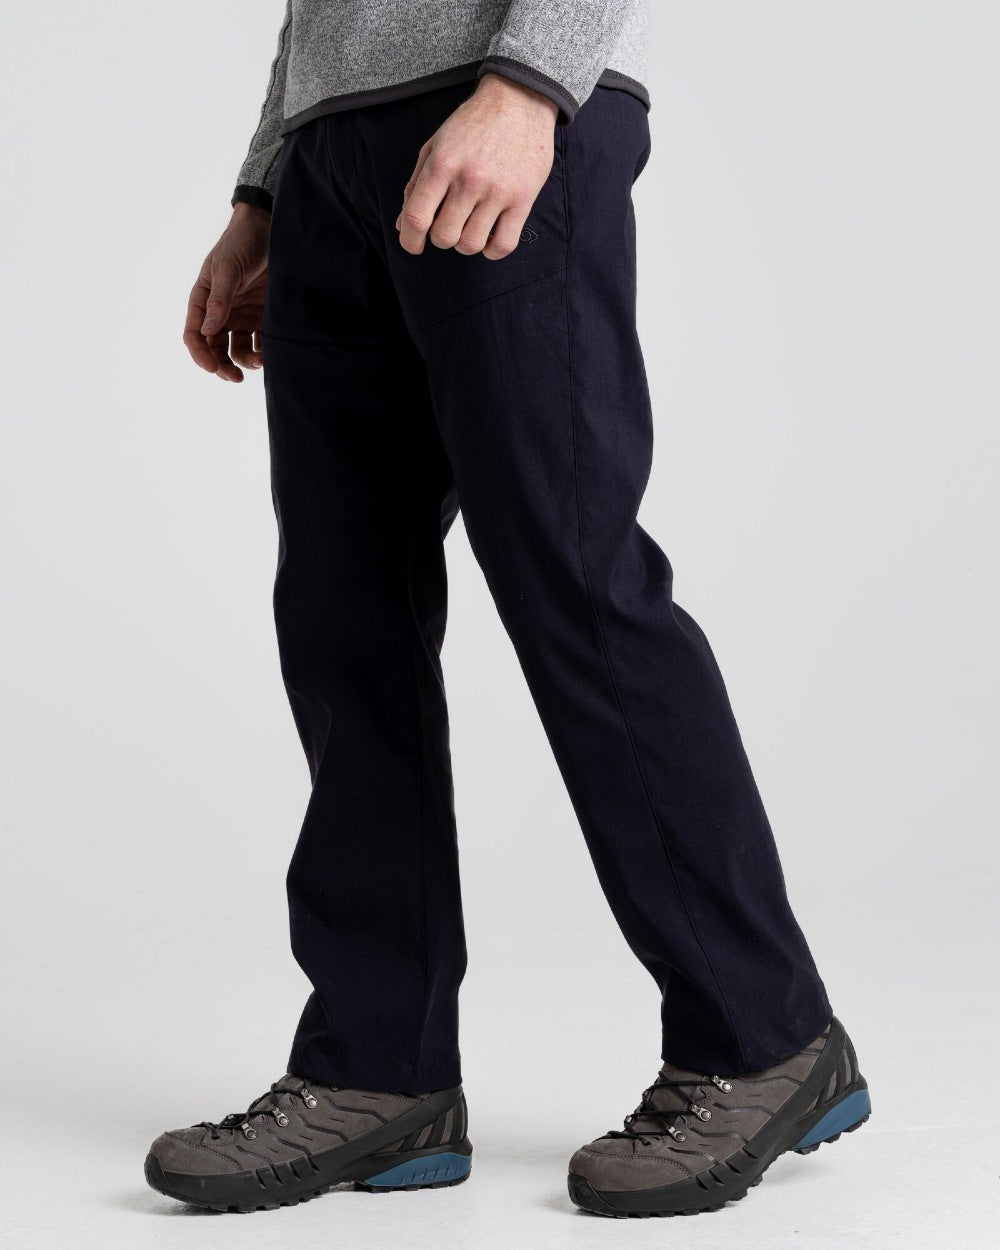 Dark Navy Coloured Craghoppers Mens Kiwi Pro II Trousers On A Grey Background 